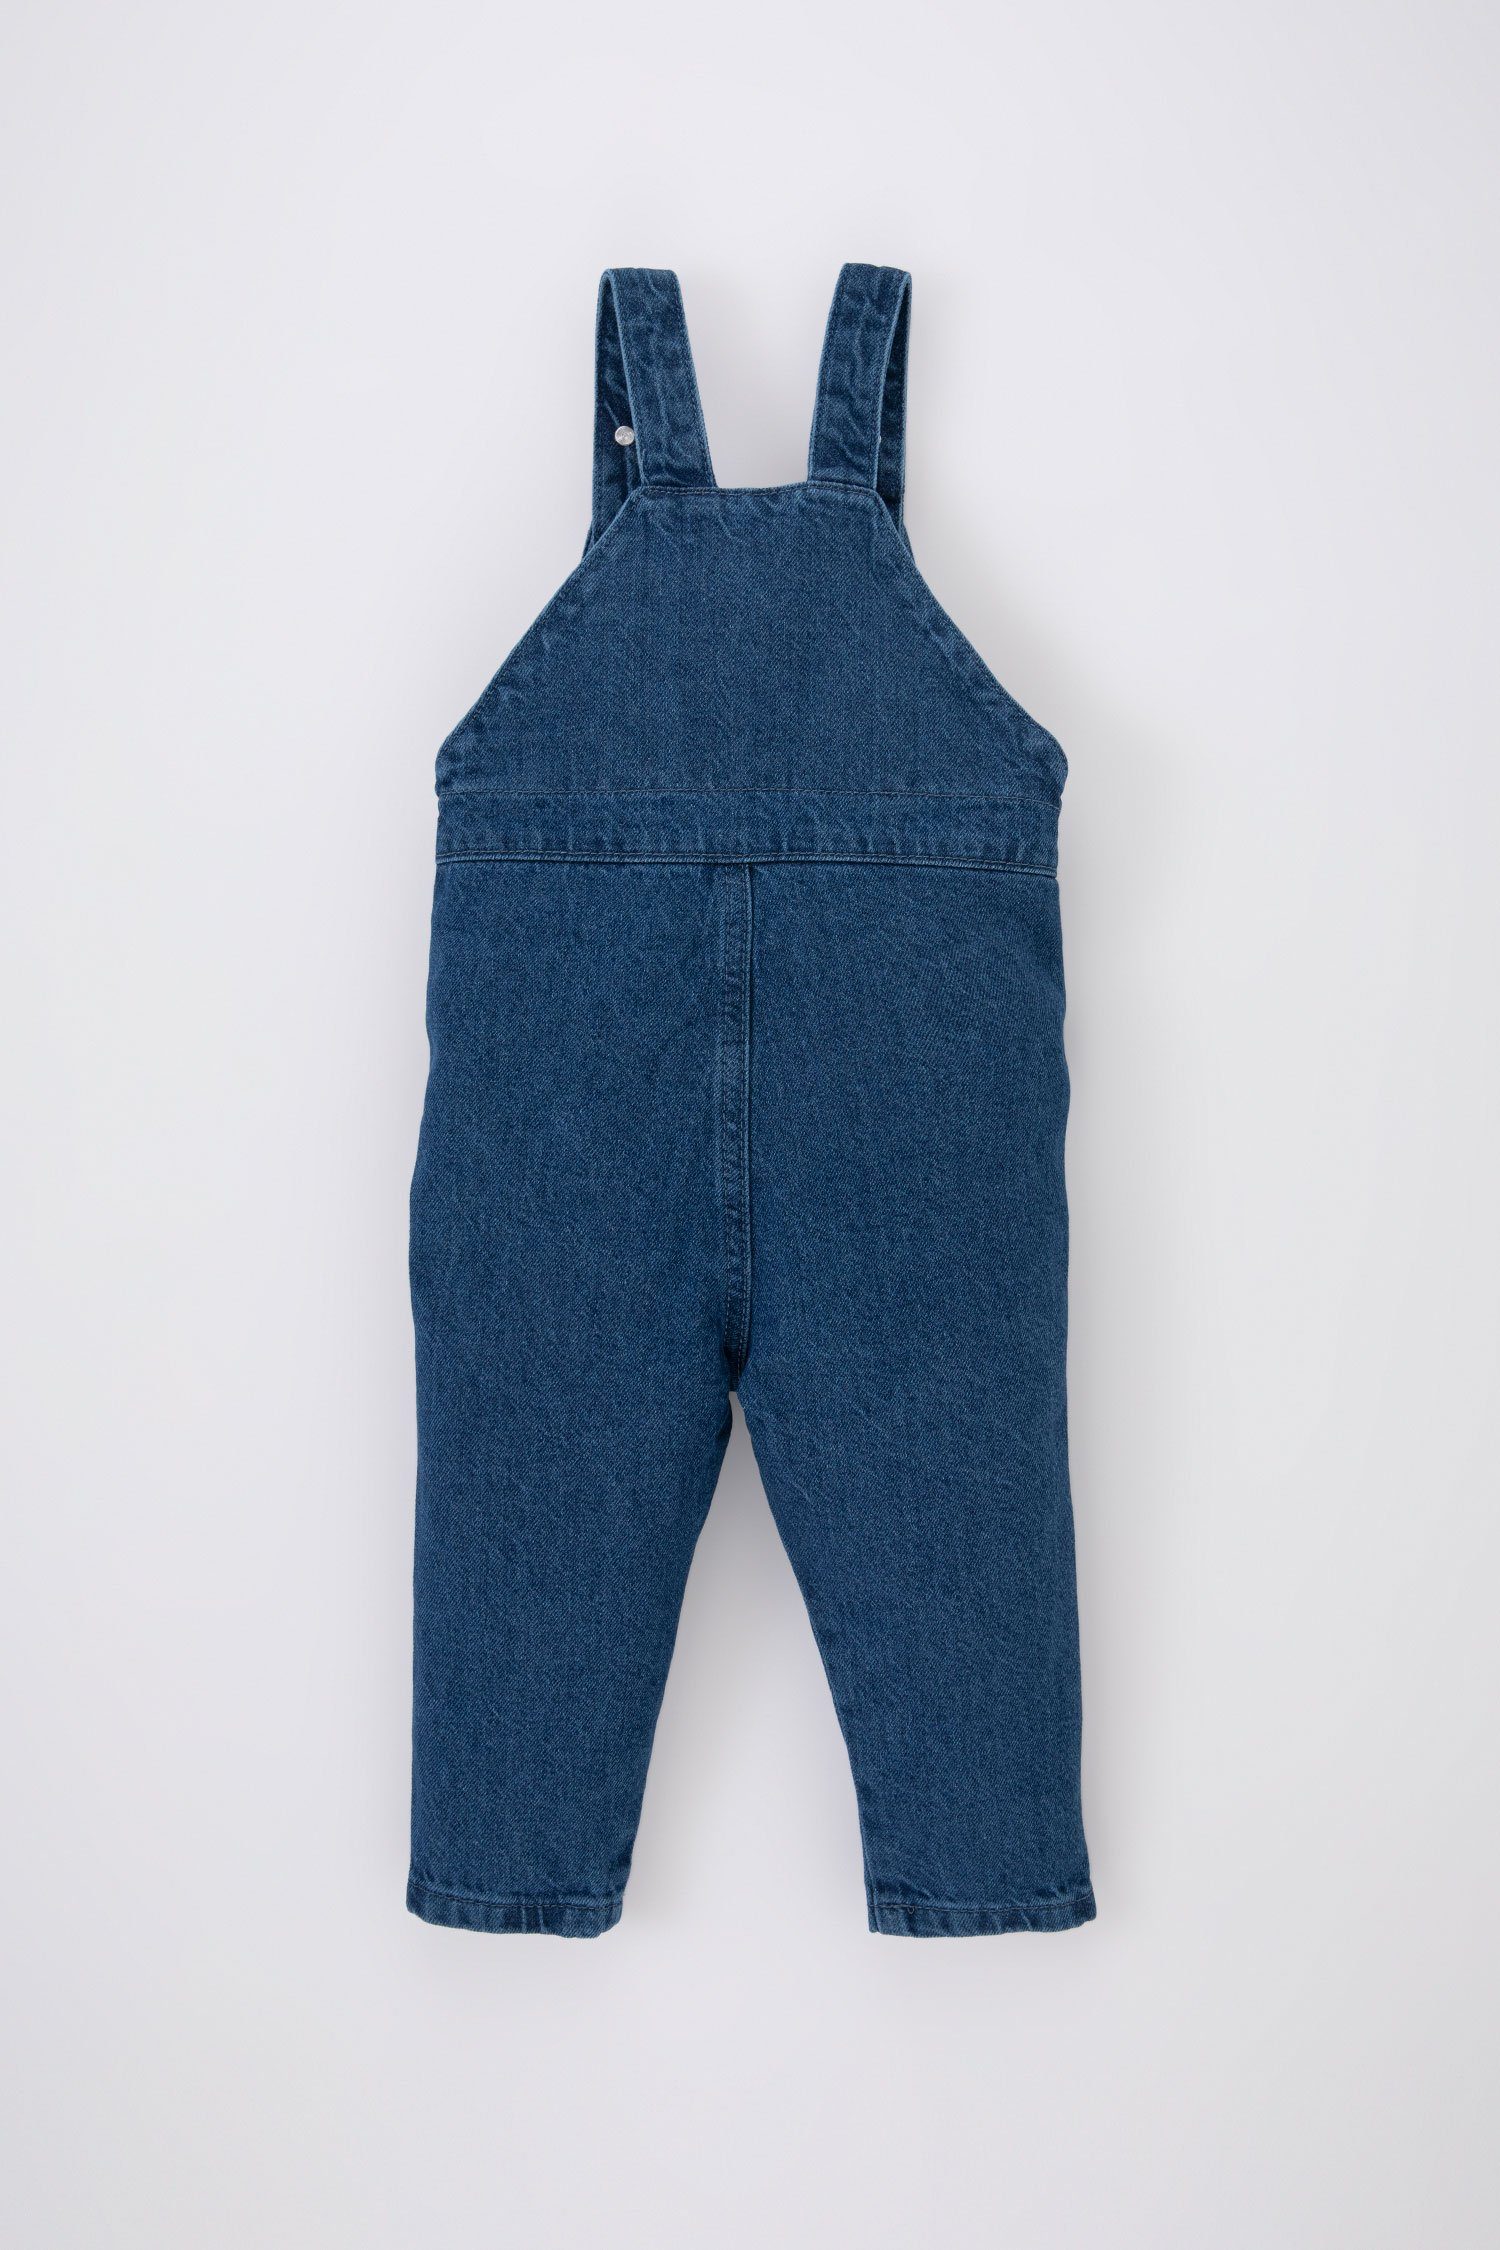 Overall DeFacto FIT REGULAR Overall BabyBoy